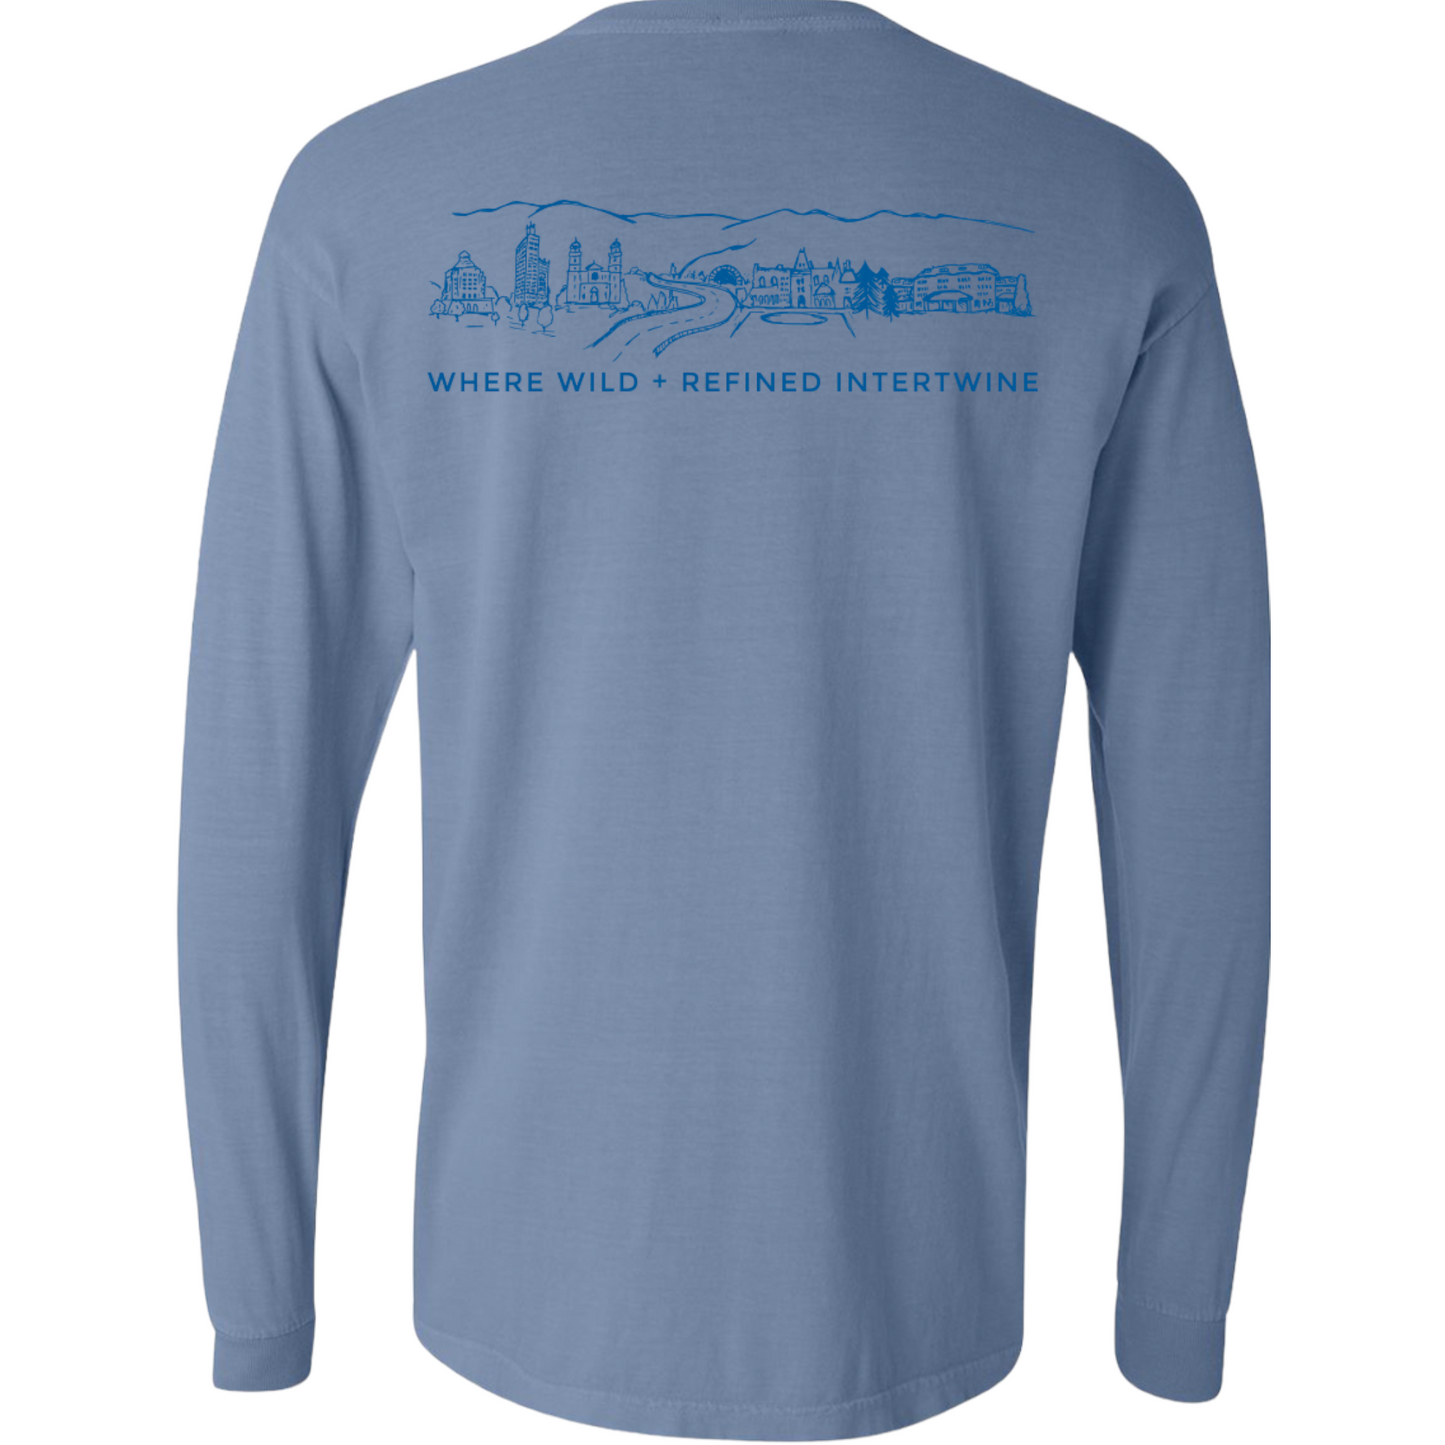 ASHEVILLE Cityscape Long Sleeved T-Shirt in Blue Jean & Parkway Blue - The ASHEVILLE Co. TM